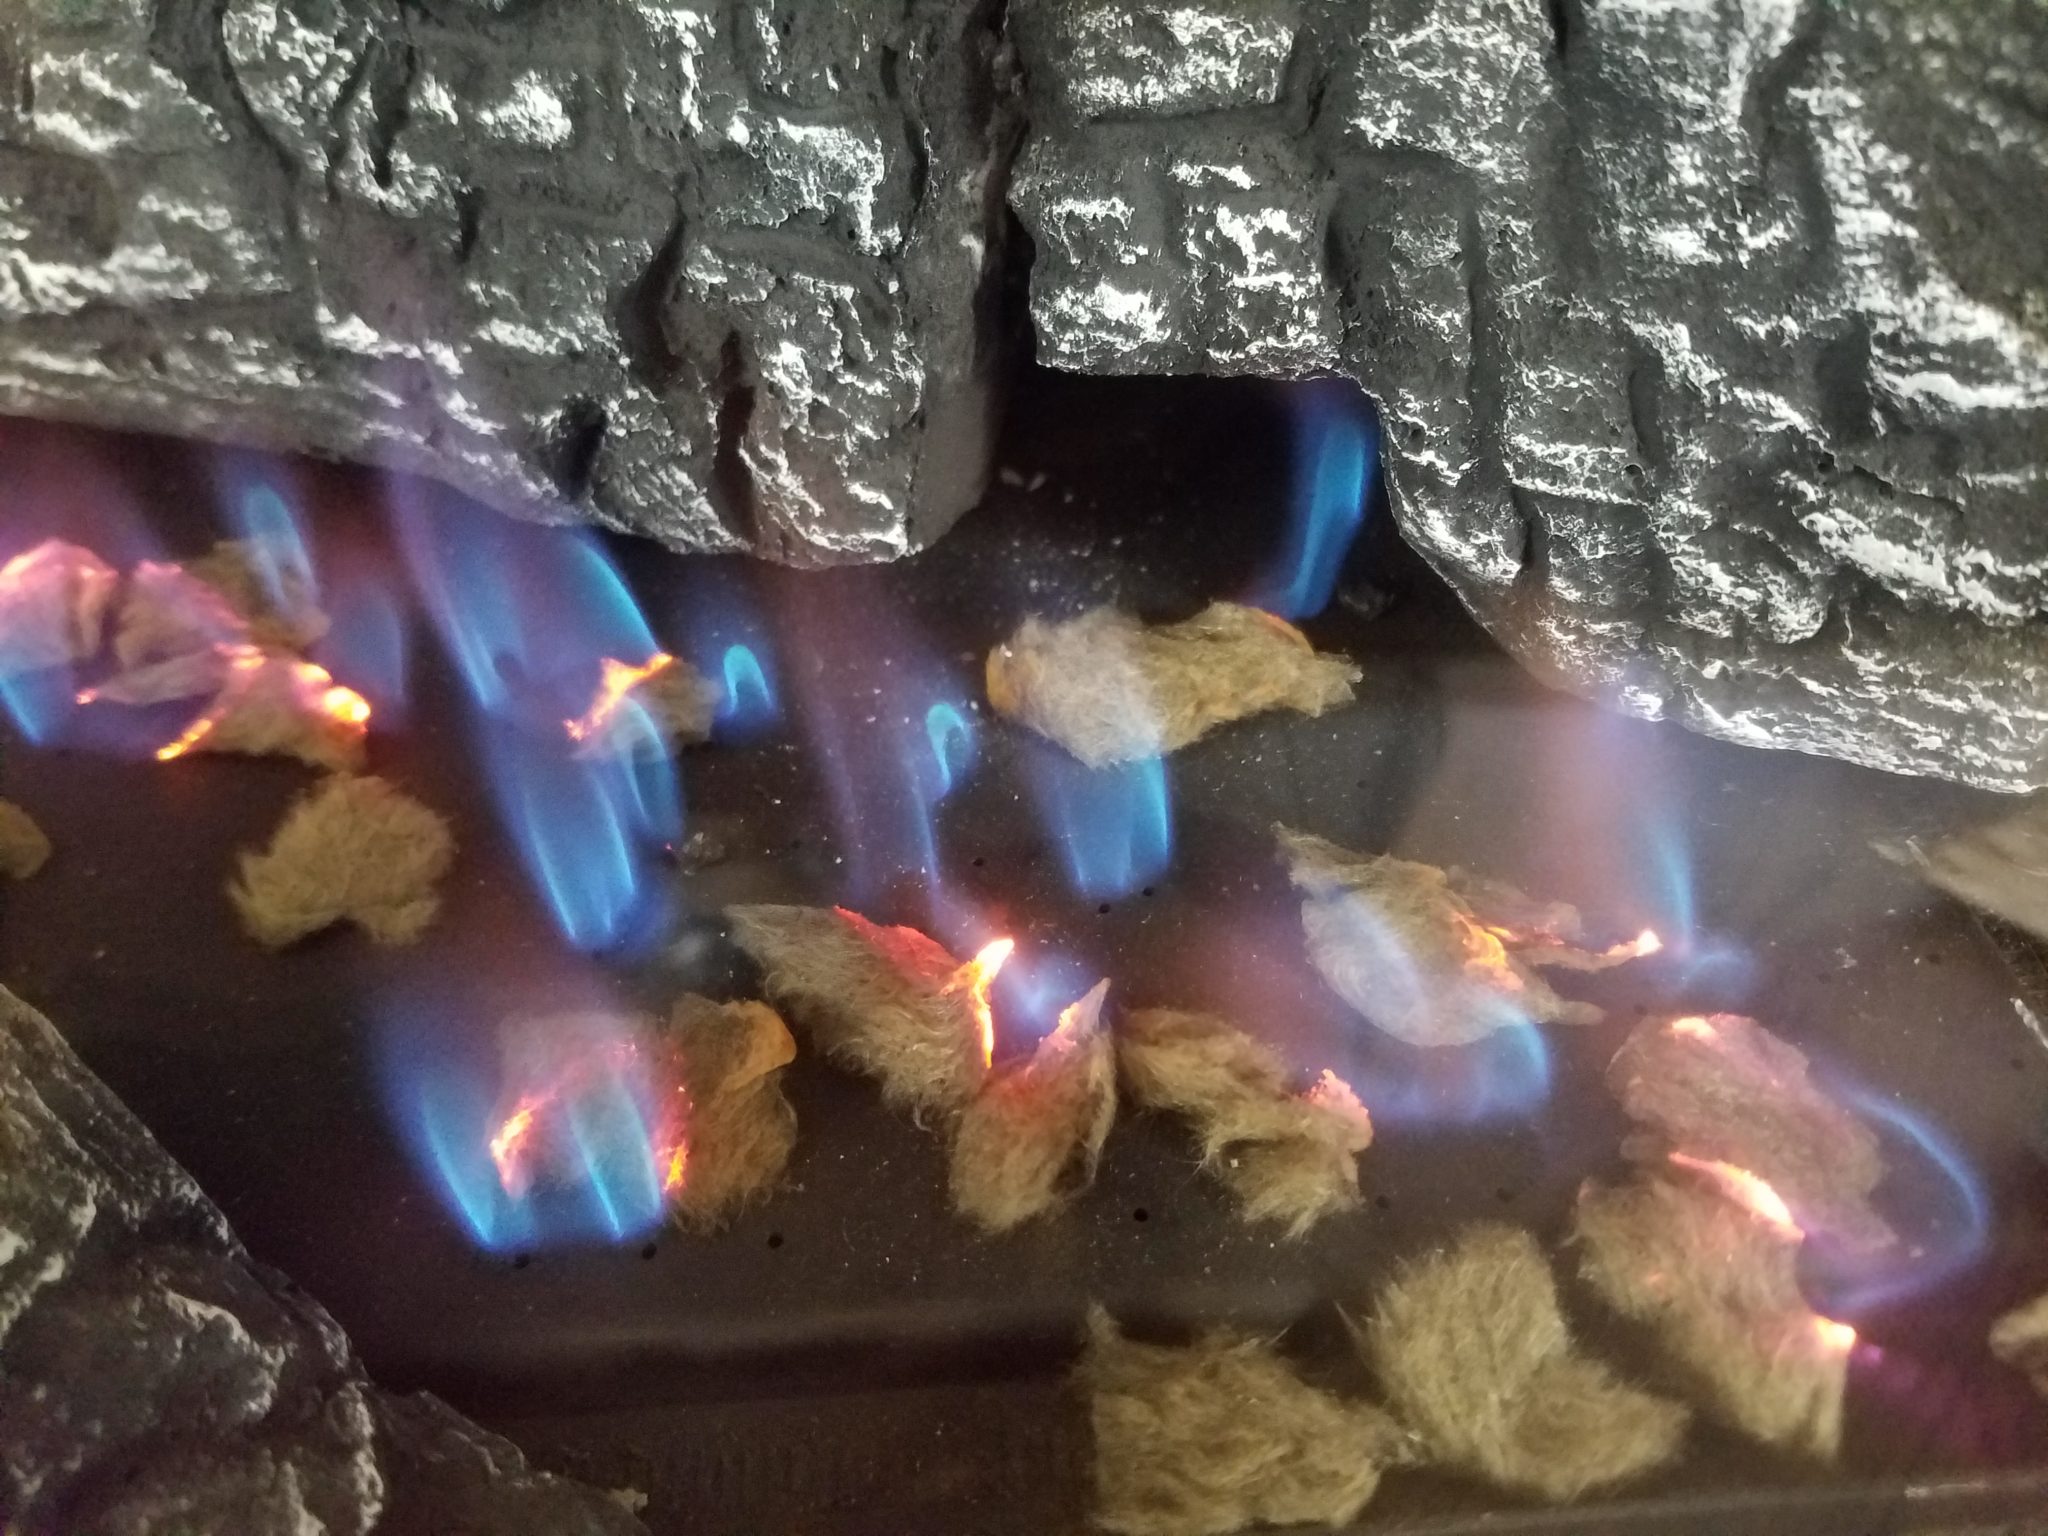 Does My Gas Fireplace Need to be Serviced? - Chimney Sweeps, Fireplace  Repairs, and Installations